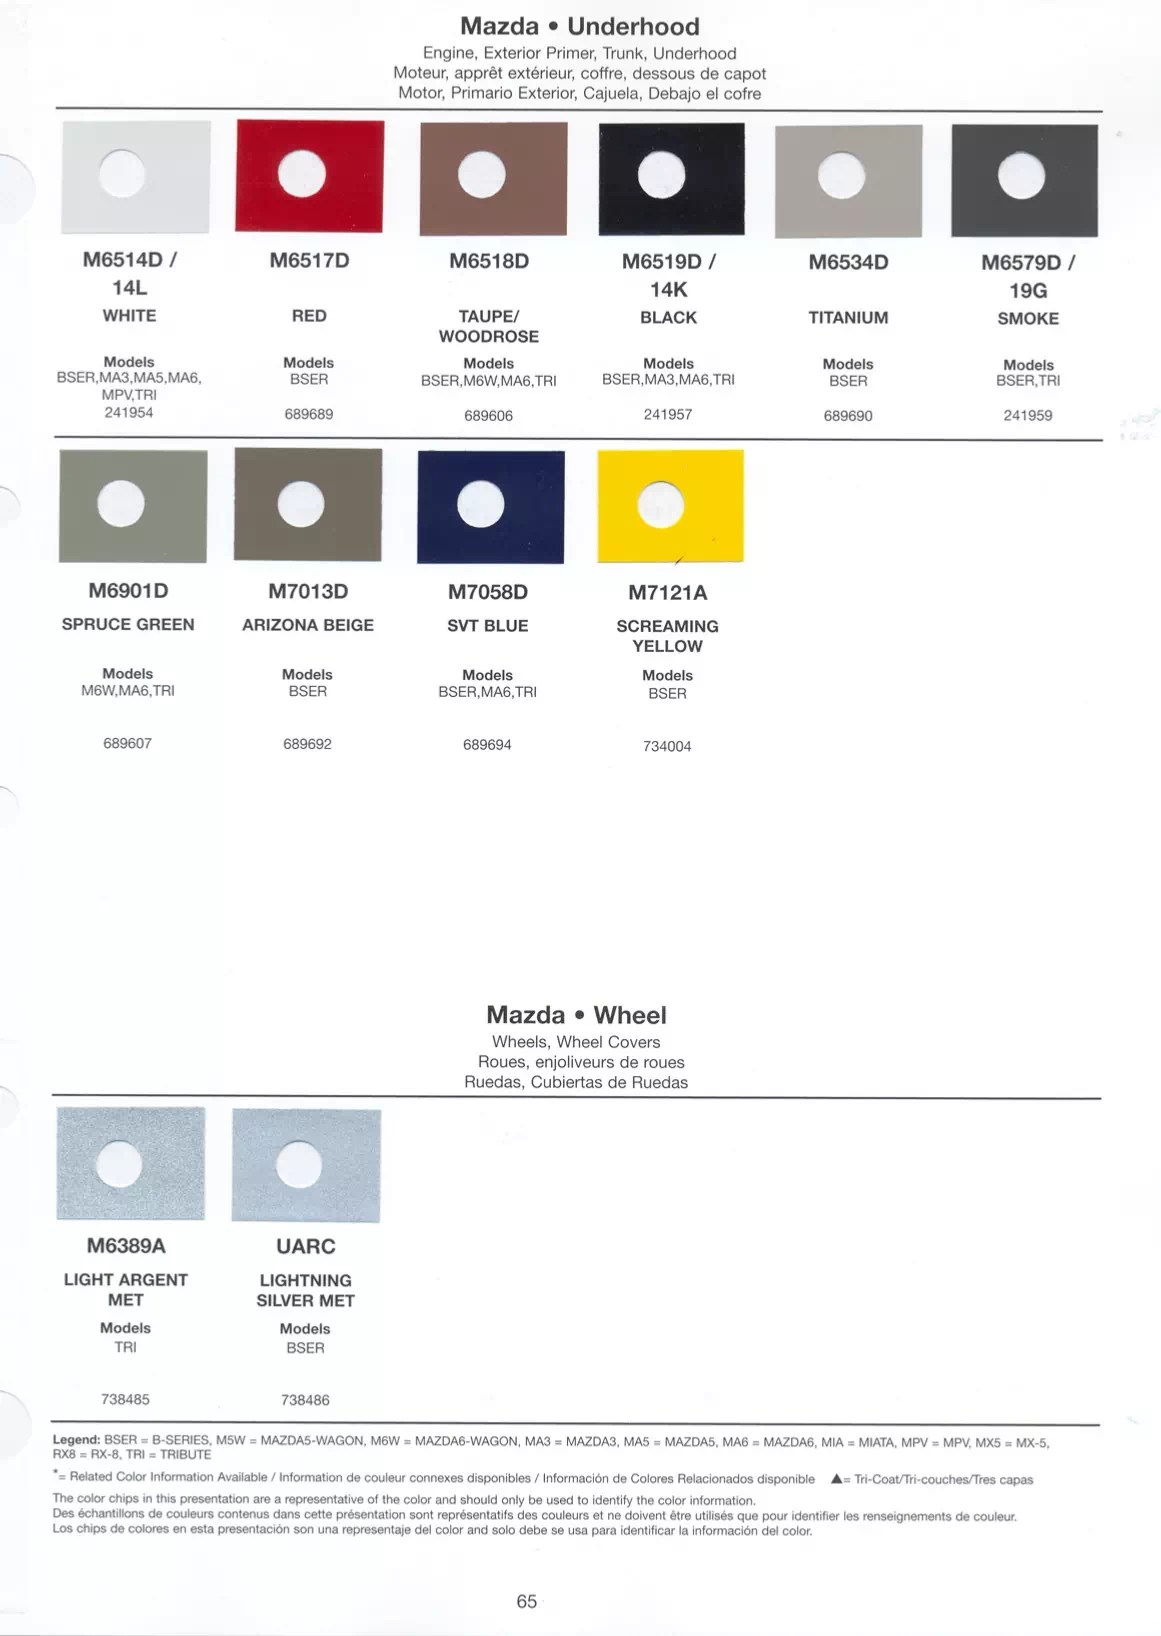 Oem paint codes, Color Names, and Paint swatches showing what colors Mazda had for what 2006 models.